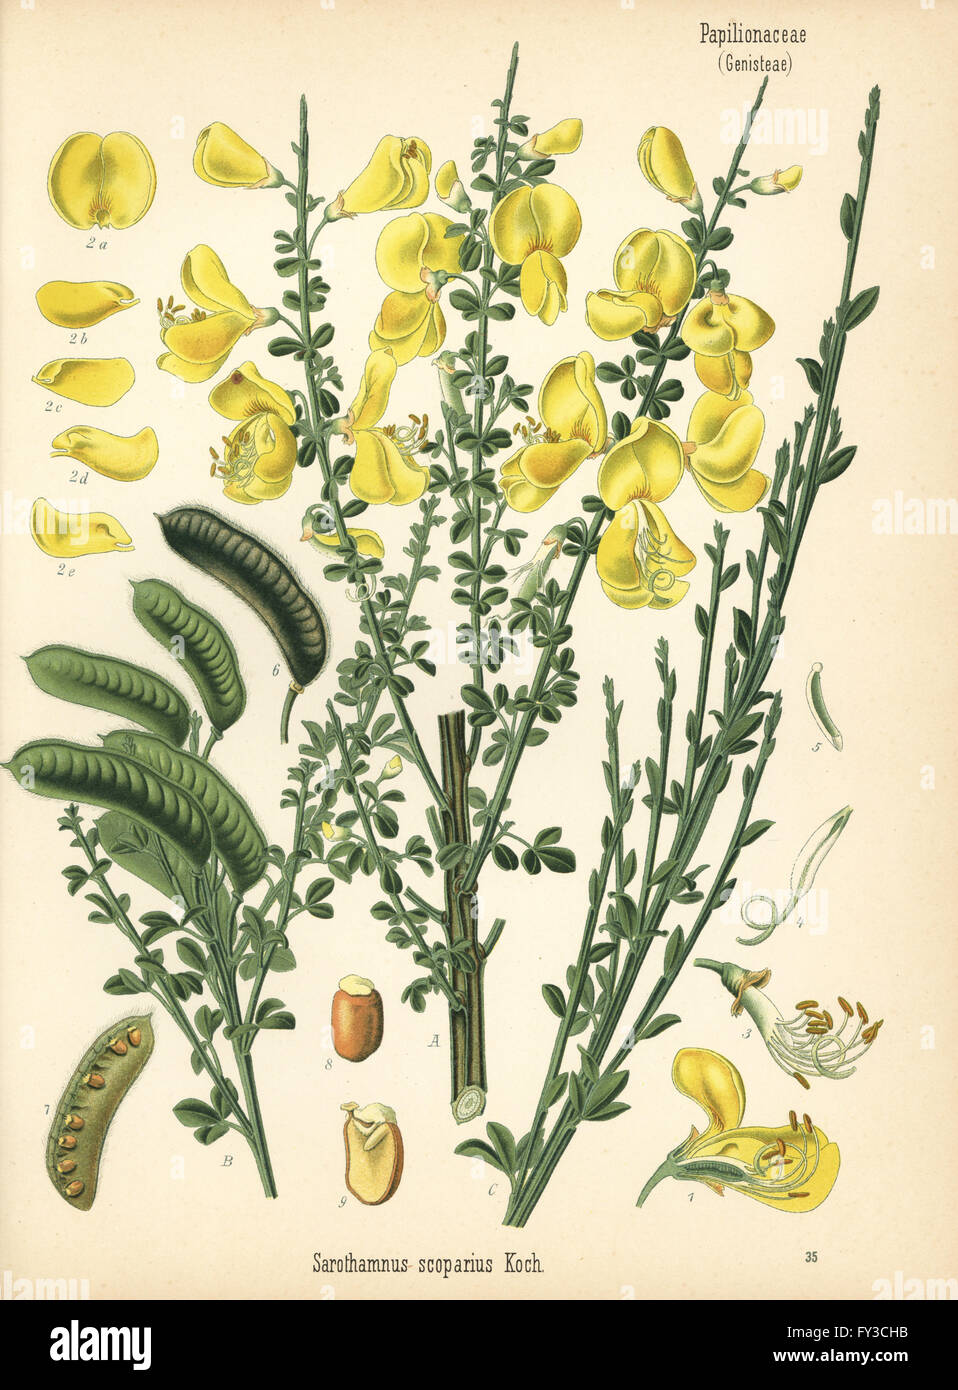 Common broom tree or Scotch broom, Cytisus scoparius (Sarothamnus scoparius). Chromolithograph after a botanical illustration from Hermann Adolph Koehler's Medicinal Plants, edited by Gustav Pabst, Koehler, Germany, 1887. Stock Photo